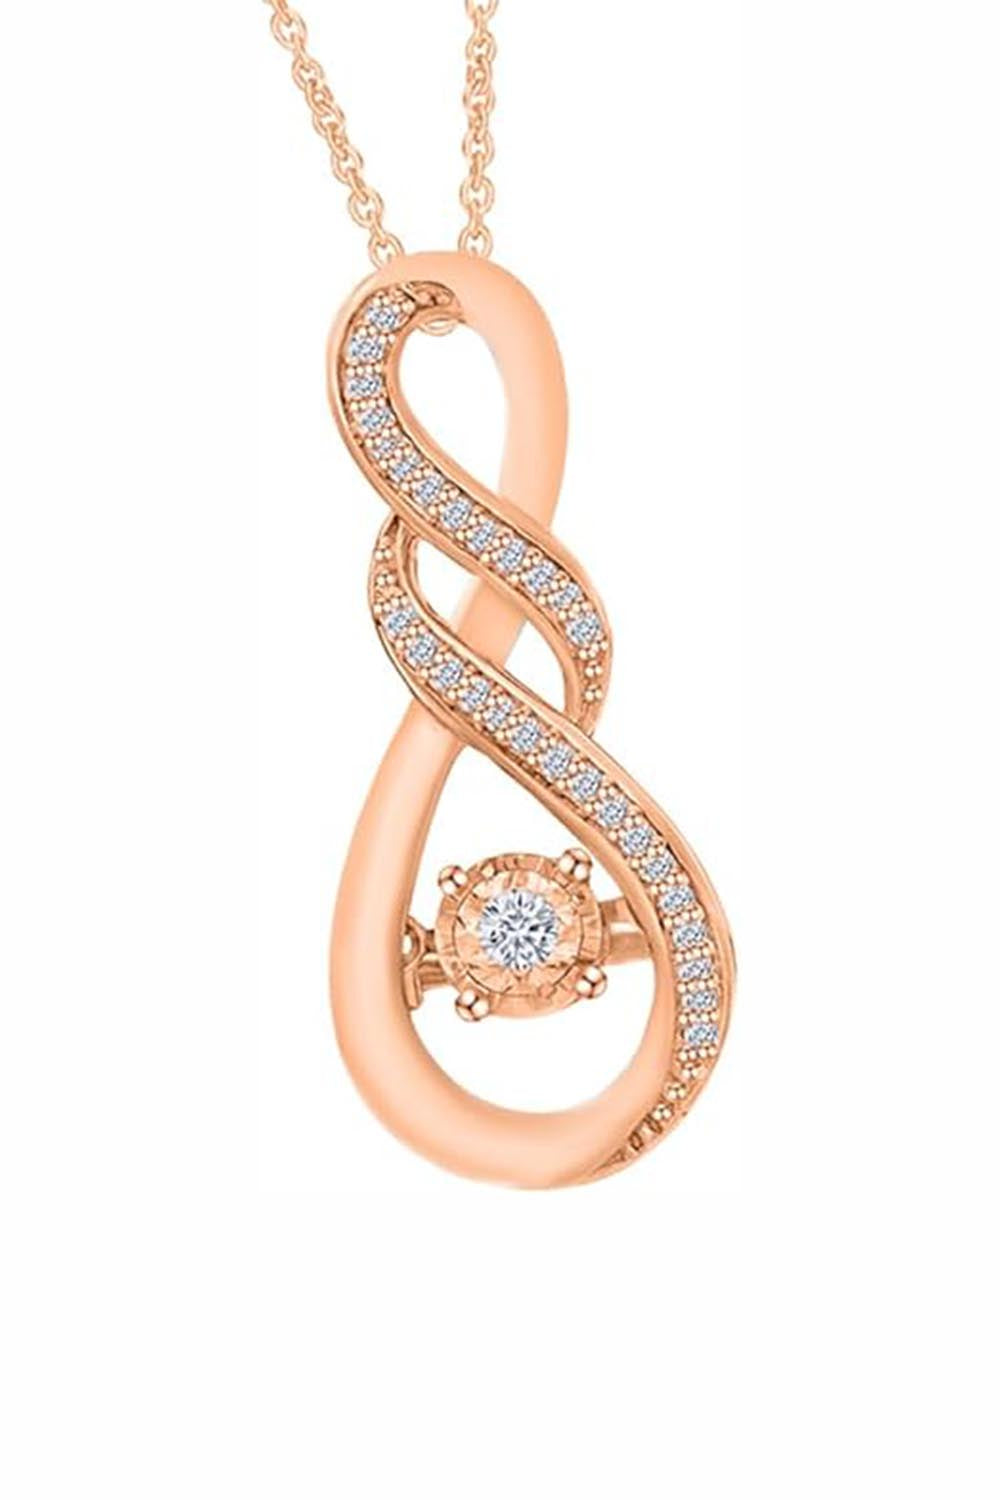 Rose Gold Color Yaathi Double Infinity Pendant Necklace, Jewellery